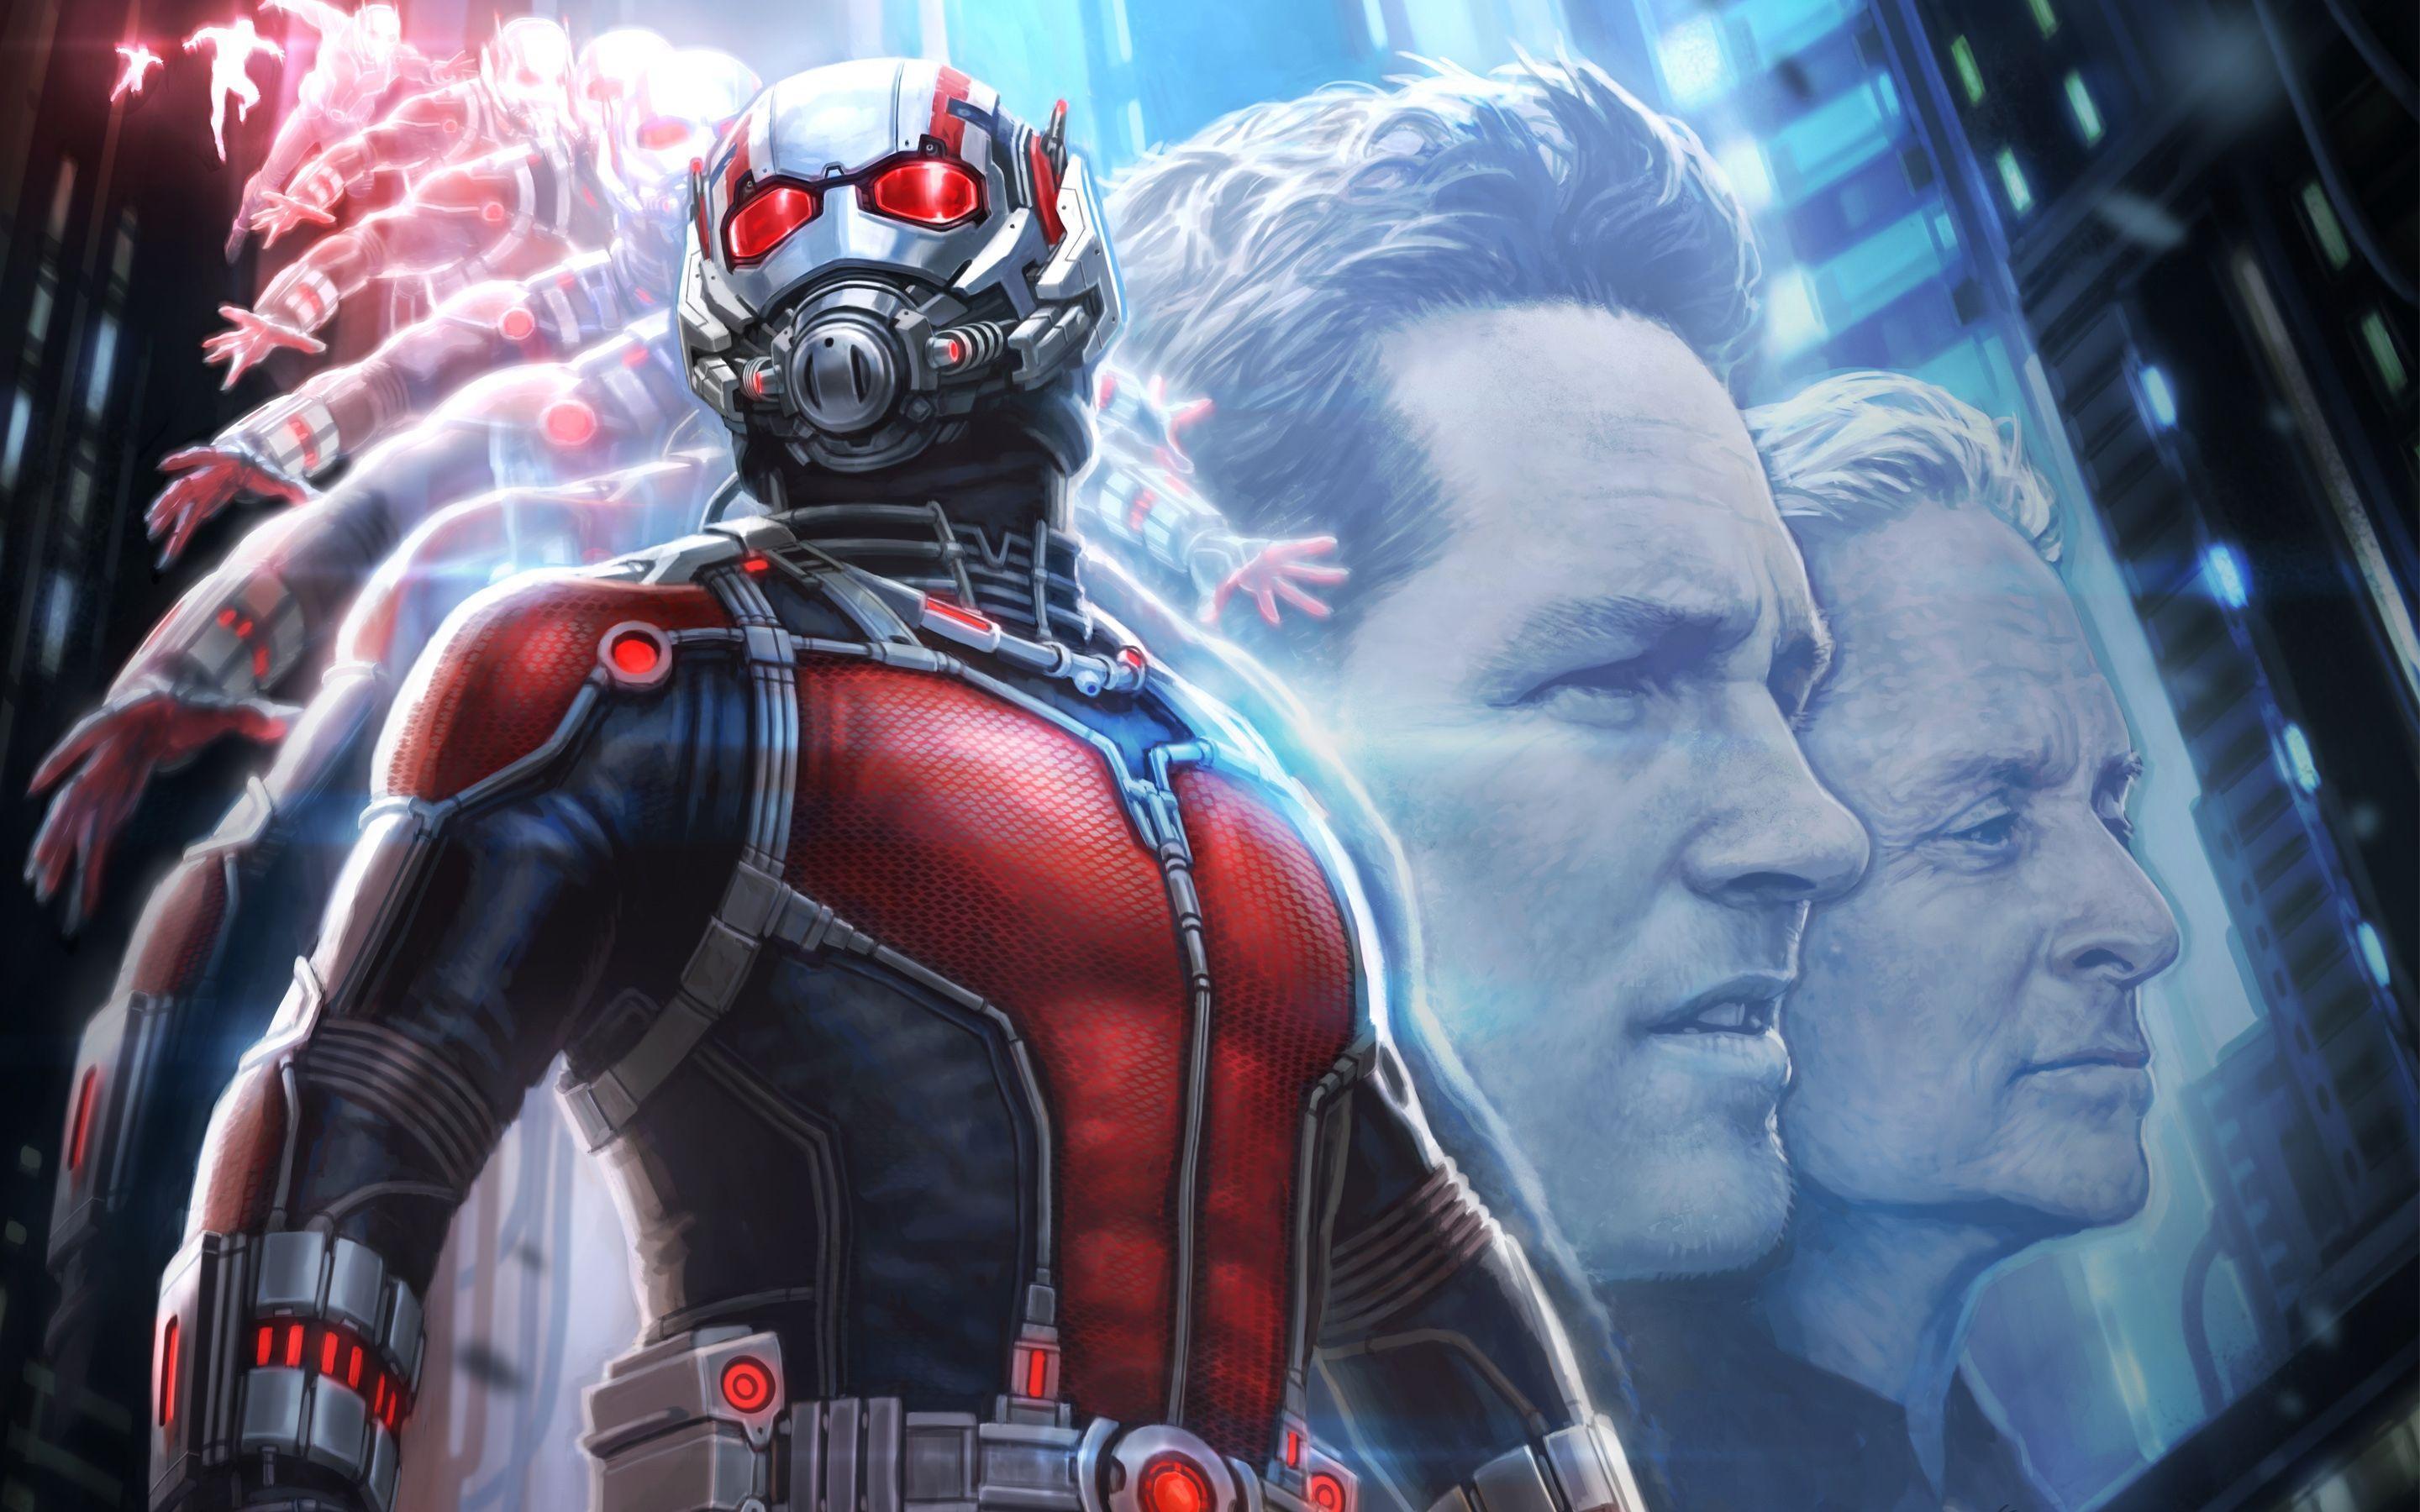 Ant-Man Wallpapers